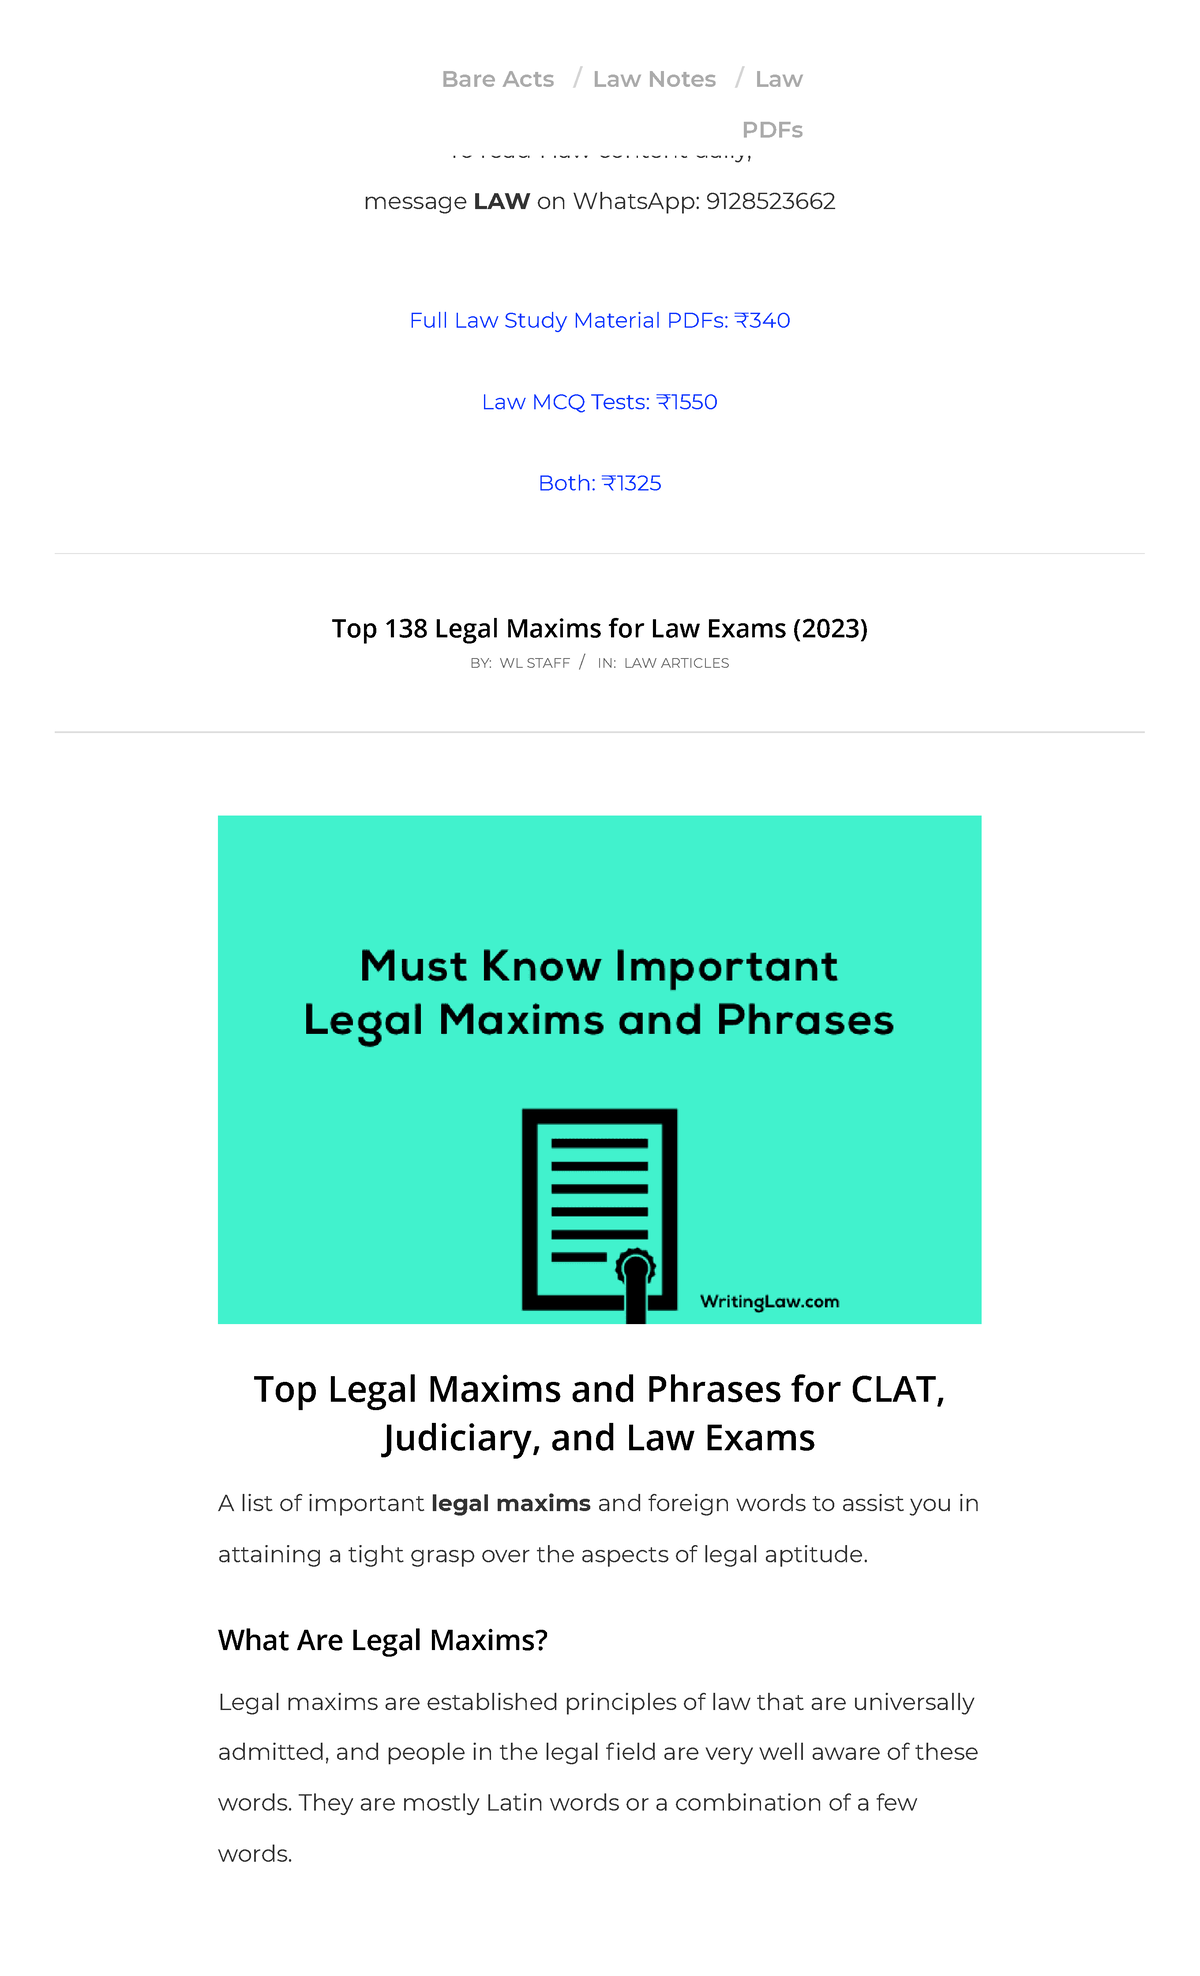 Top 138 Legal Maxims With Meaning For Clat And Judiciary 2023 Writinglaw Demo Test Law 9783